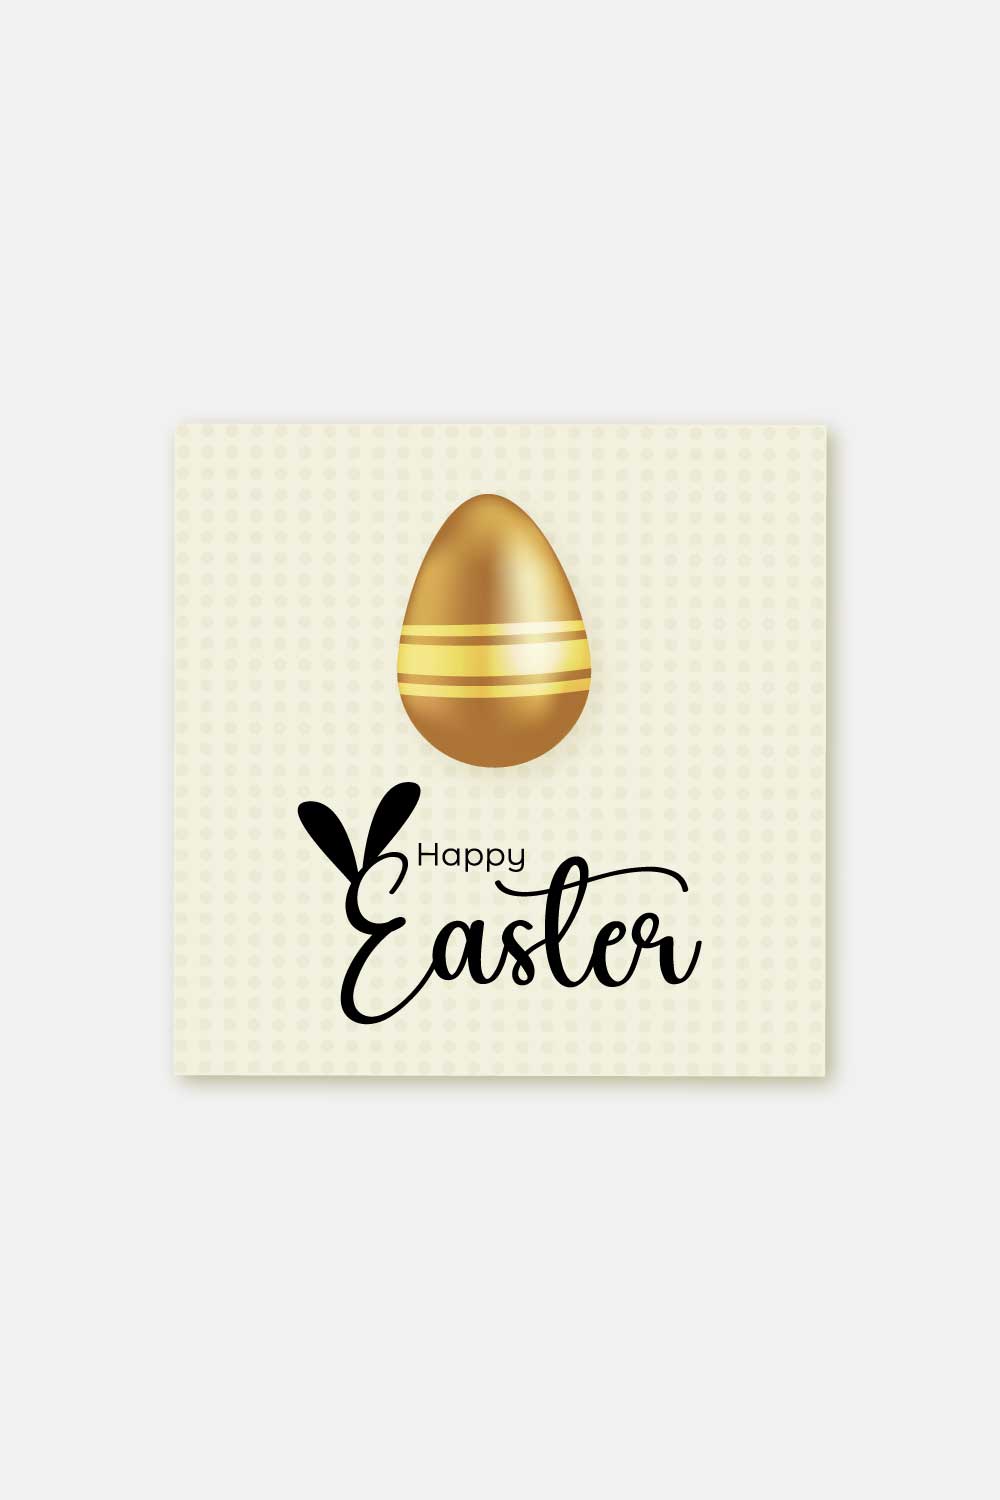 Happy Easter background pinterest preview image.